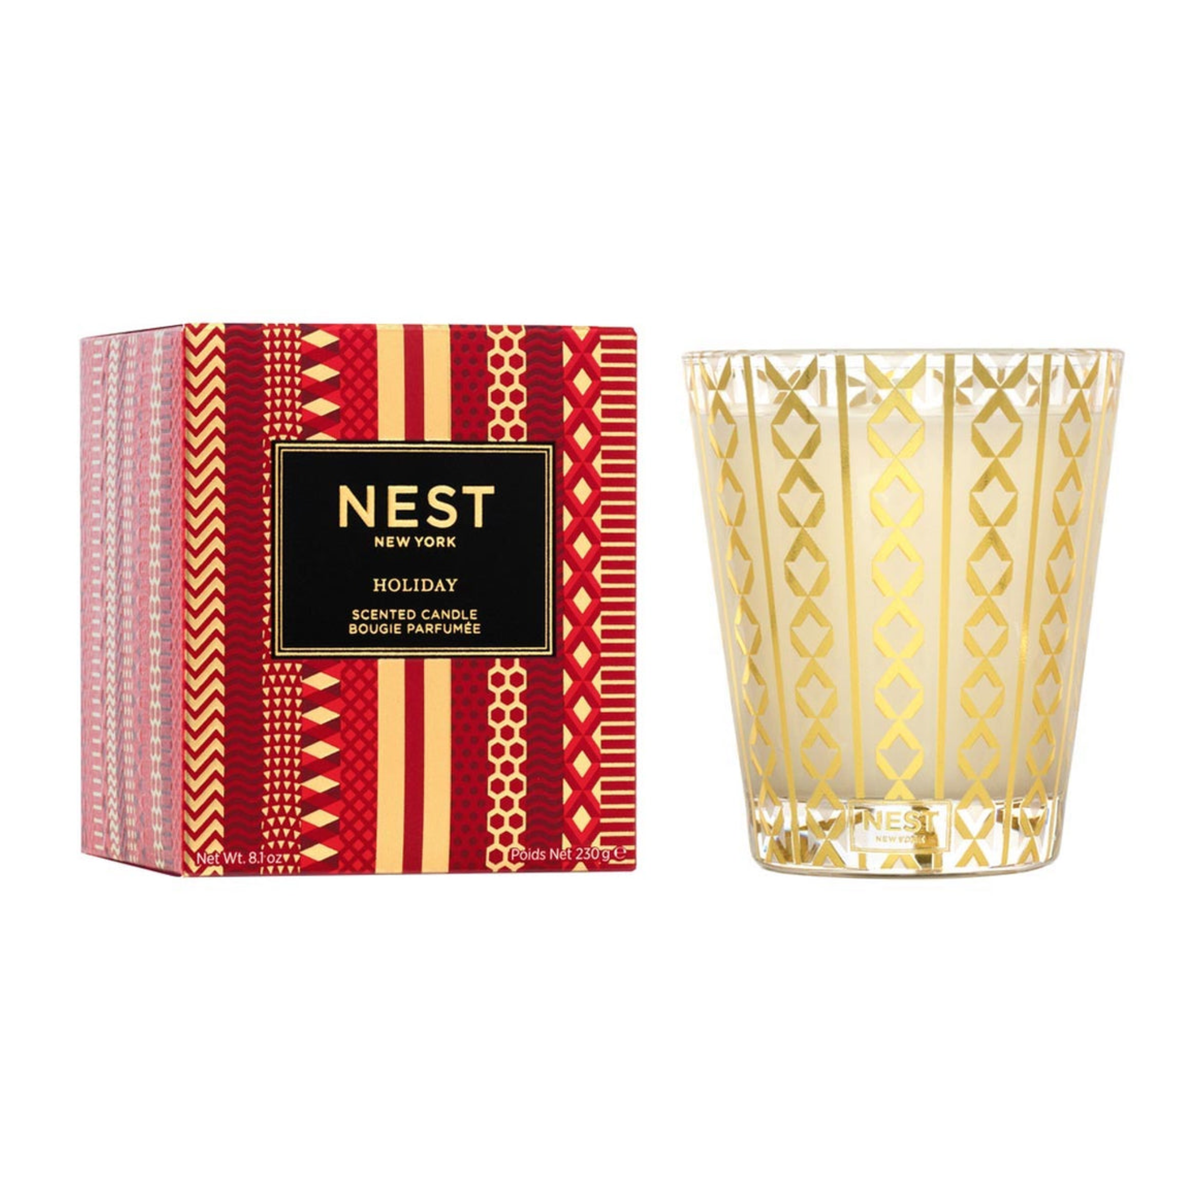 Product Image of Nest New York Holiday Classic Candle with Box